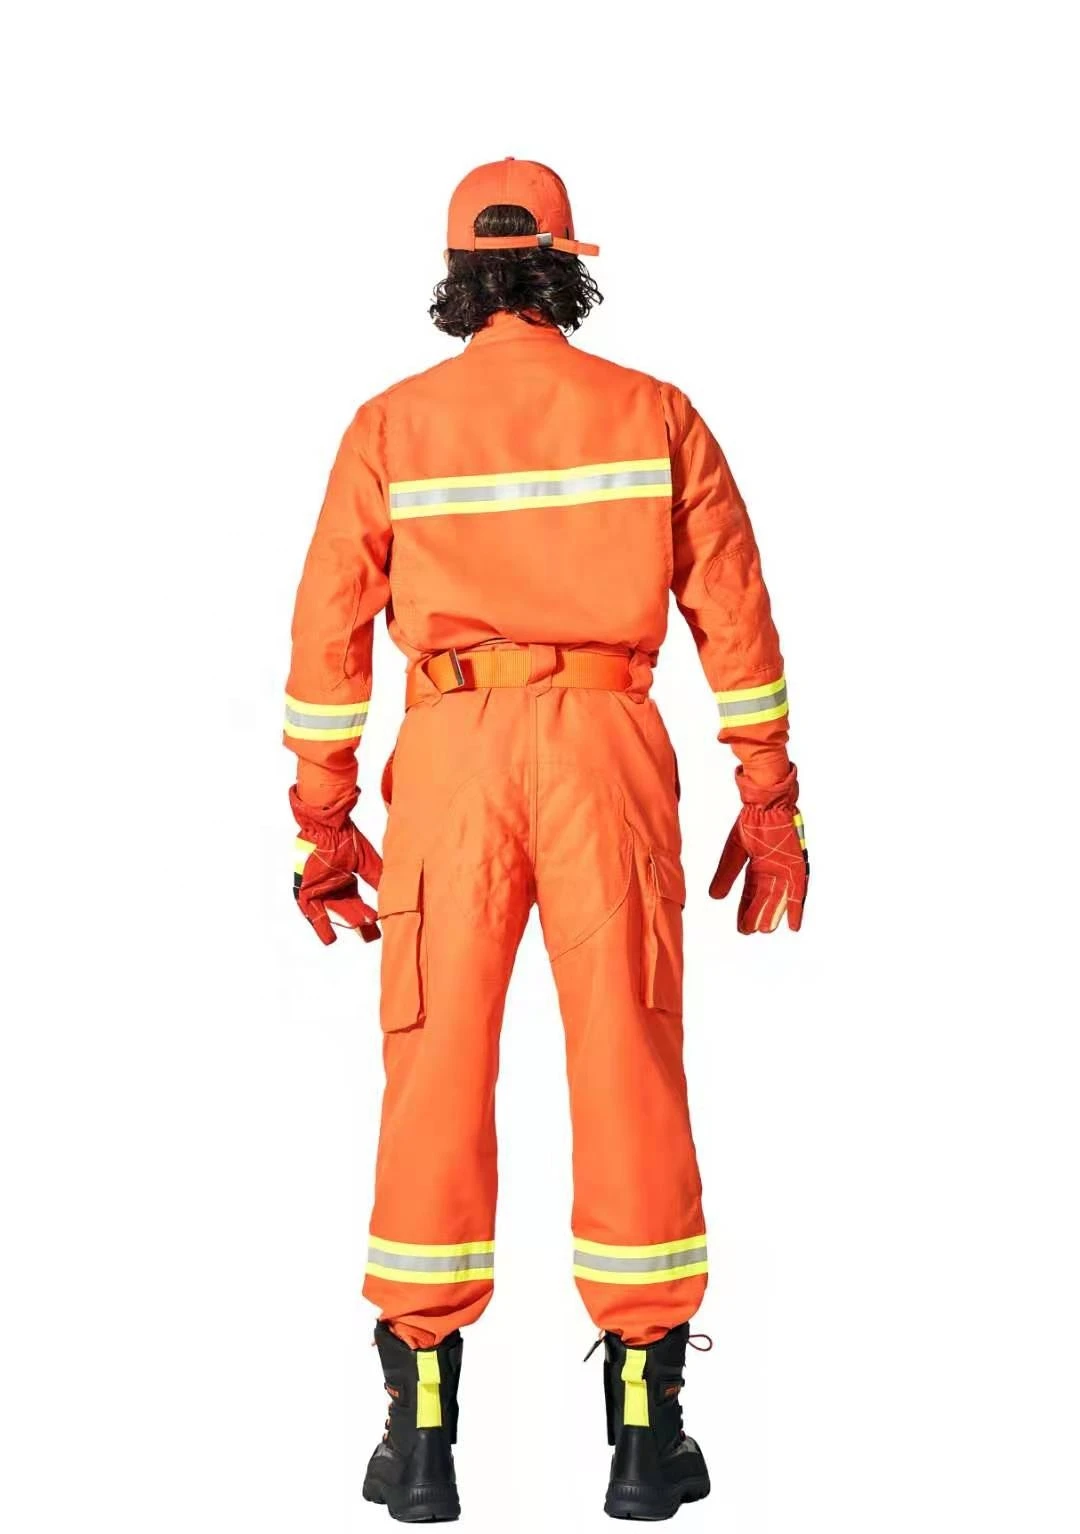 EN469 Bunker /Turnout Gear Safety Firefighting Suit Protective Garment with Jacket and Pants